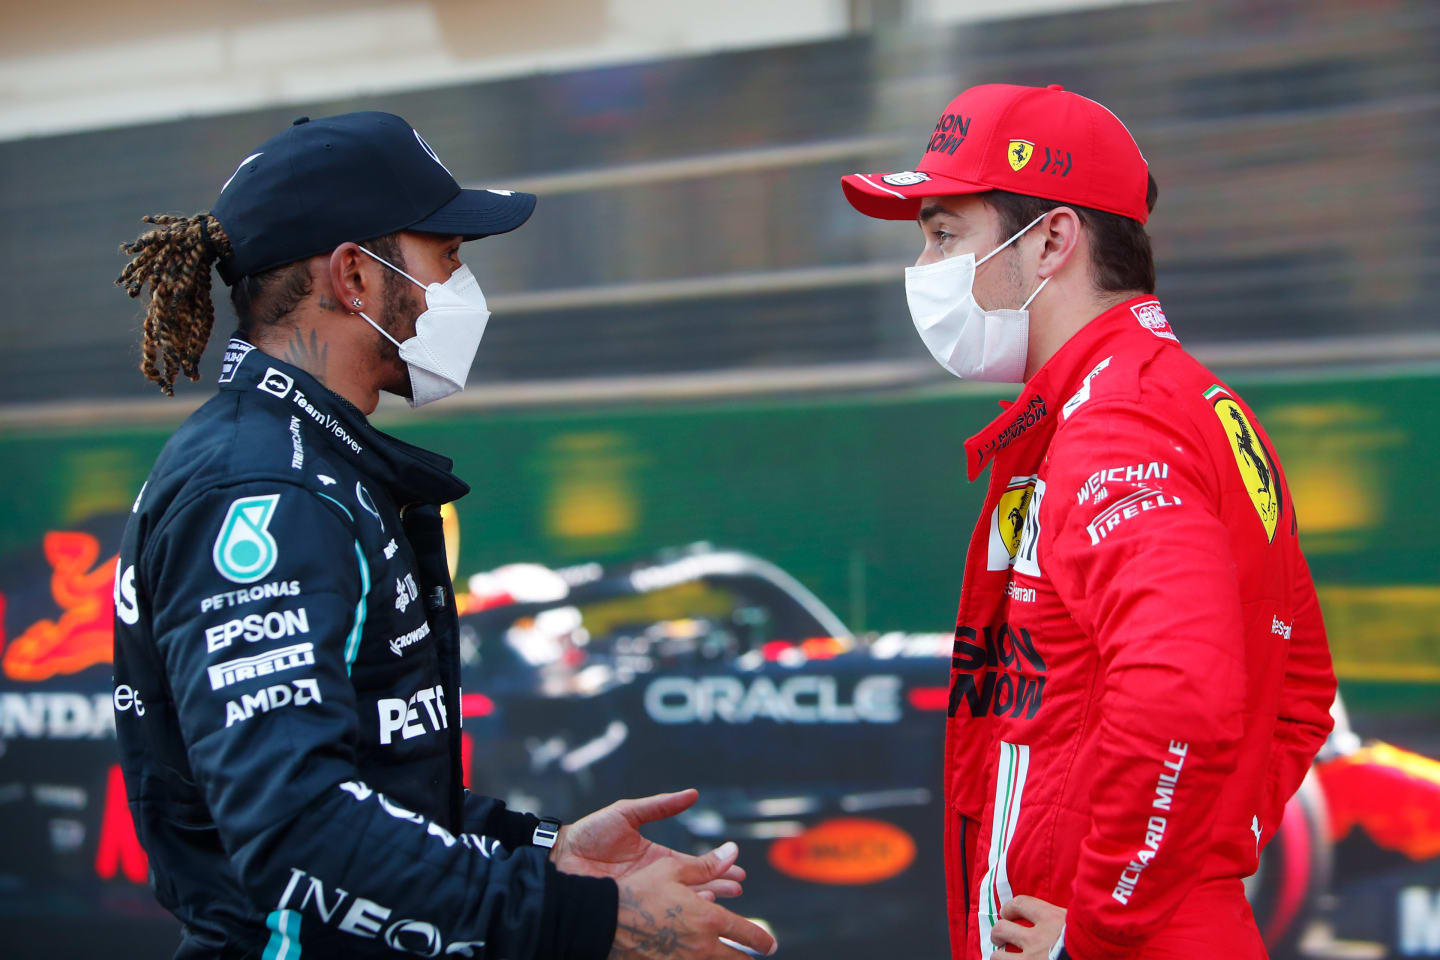 BAKU, AZERBAIJAN - JUNE 05: Second placed qualifier Lewis Hamilton of Great Britain and Mercedes GP talks with pole position qualifier Charles Leclerc of Monaco and Ferrari in parc ferme during qualifying ahead of the F1 Grand Prix of Azerbaijan at Baku City Circuit on June 05, 2021 in Baku, Azerbaijan. (Photo by Maxim Shemetov - Pool/Getty Images)